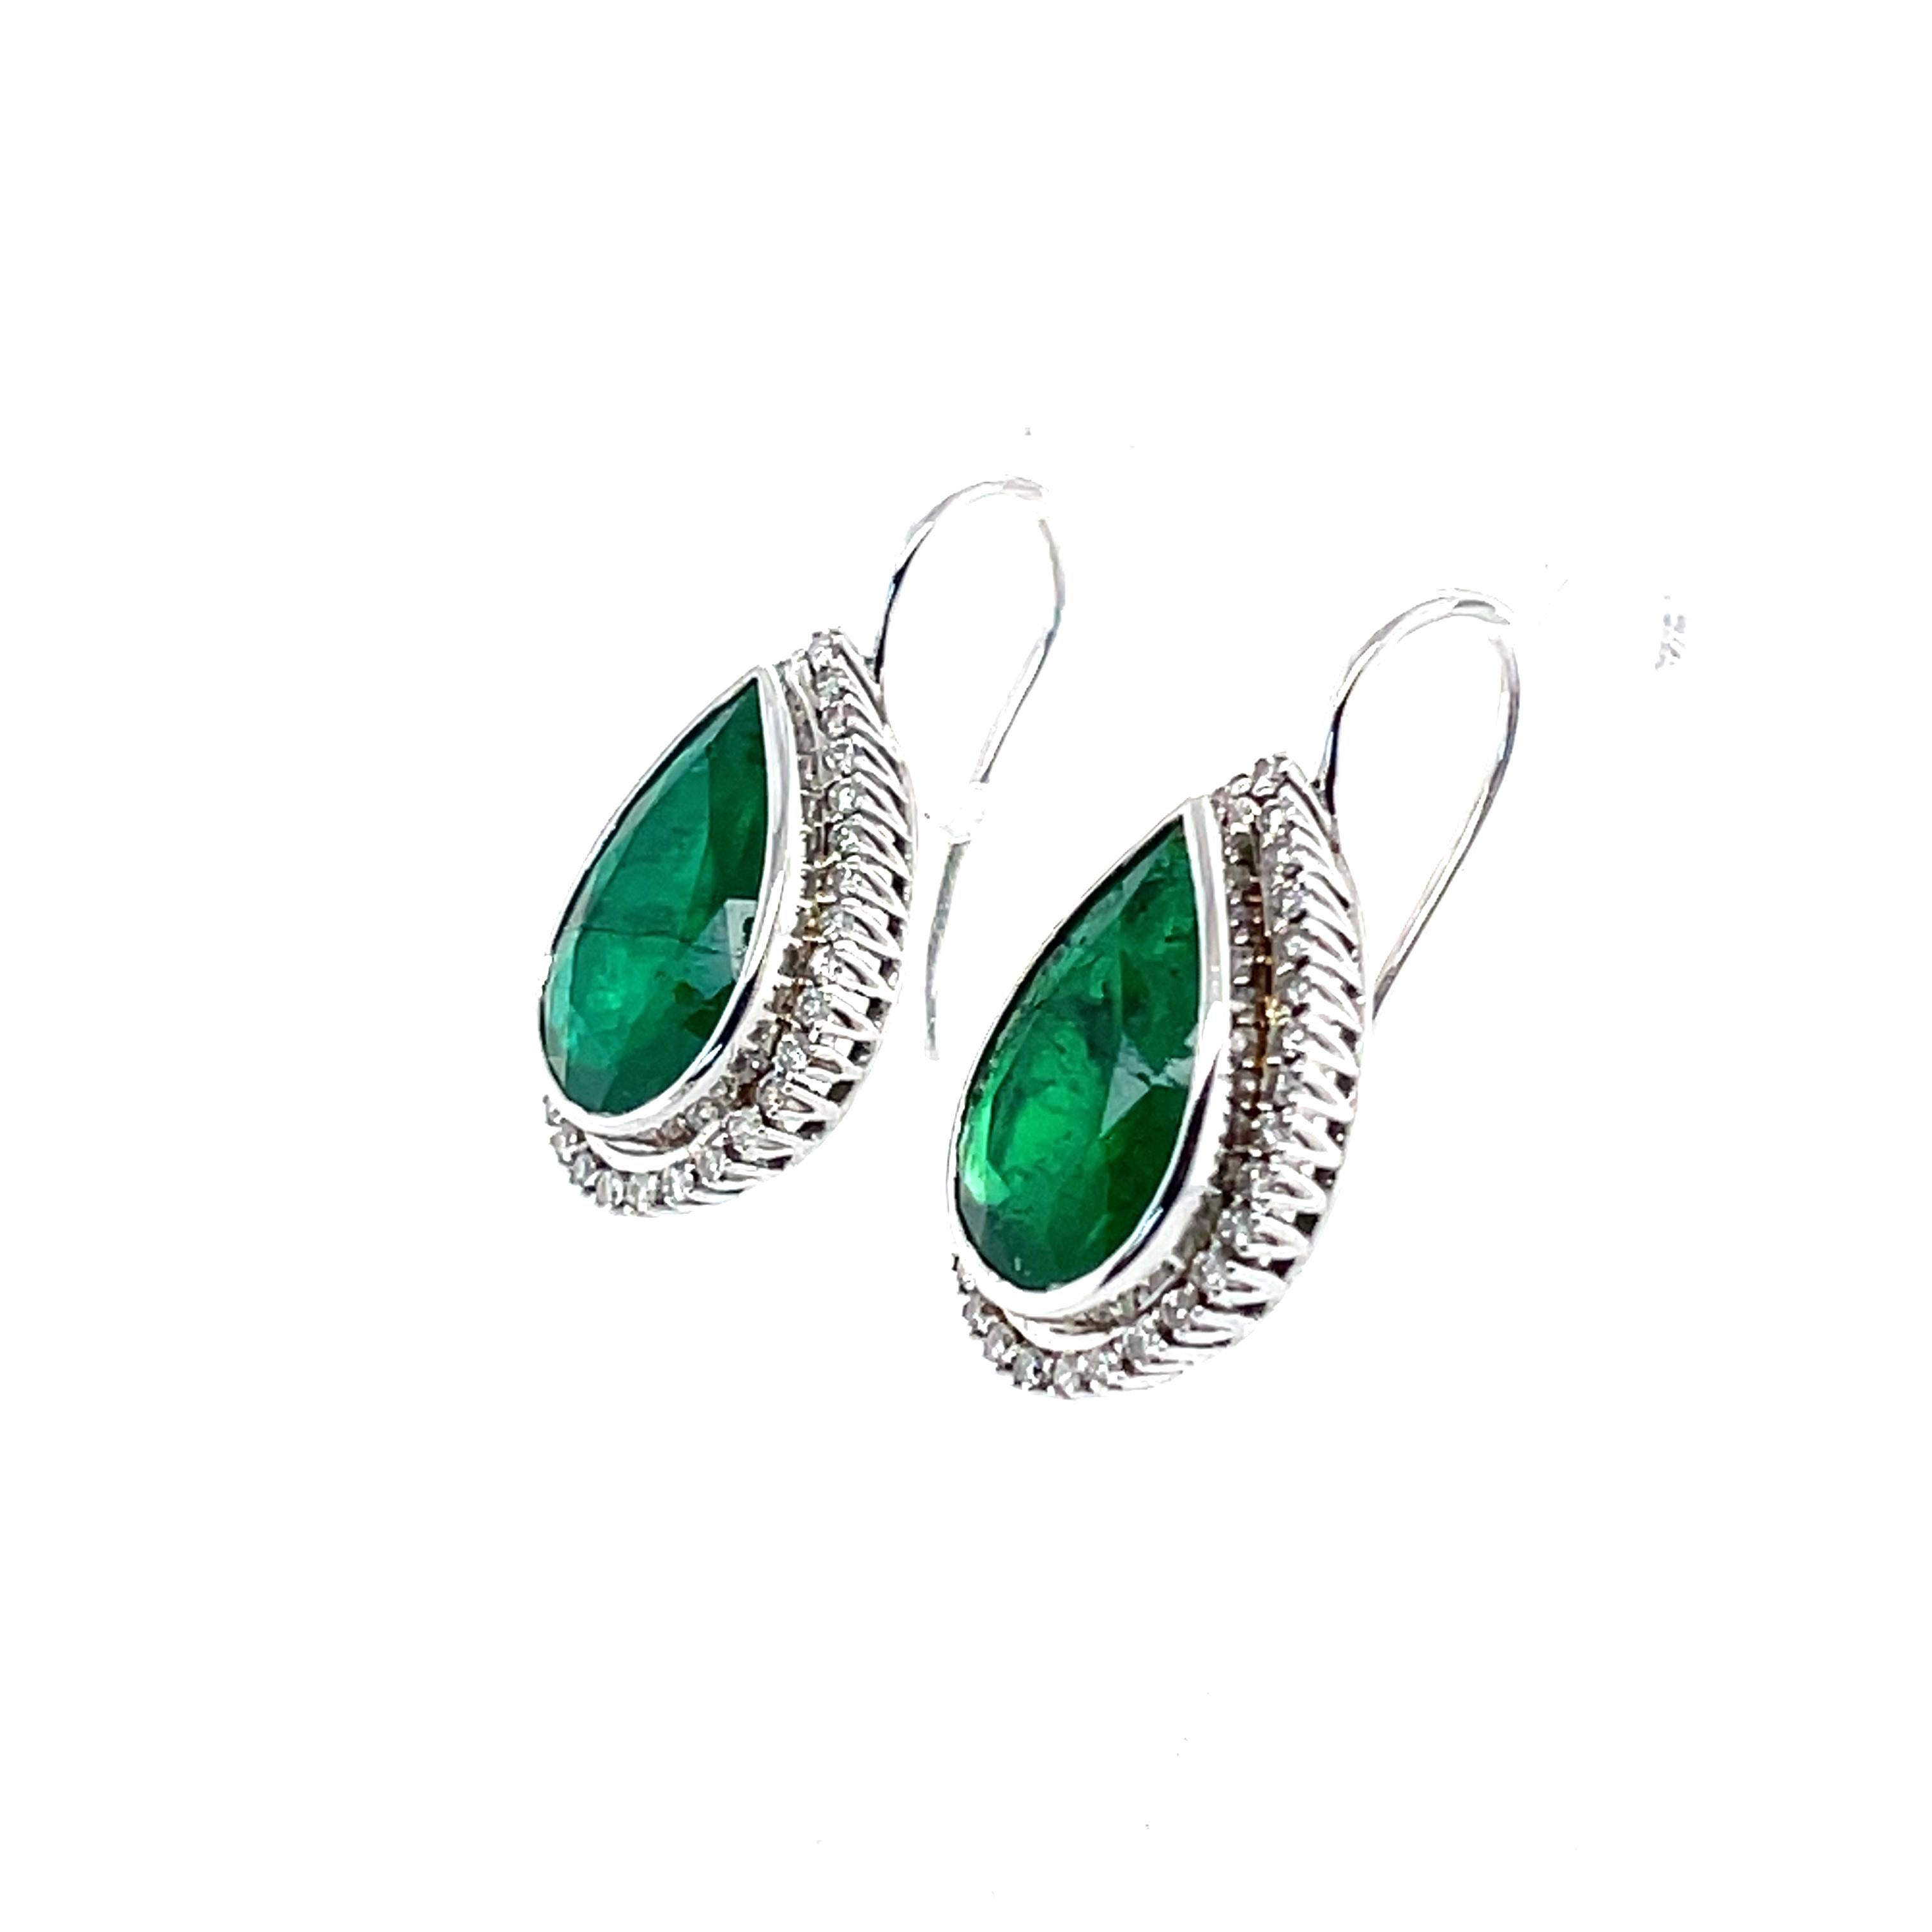 Teardrop shaped natural emeralds, complemented by a stunning range of natural round brilliant cut diamonds, complemented by a polished finish design.

Emerald Weight: 6.56ct
Emerald Colour/Grade: Medium, Strong, Green. 
Dimensions: 13.45mm(L) x